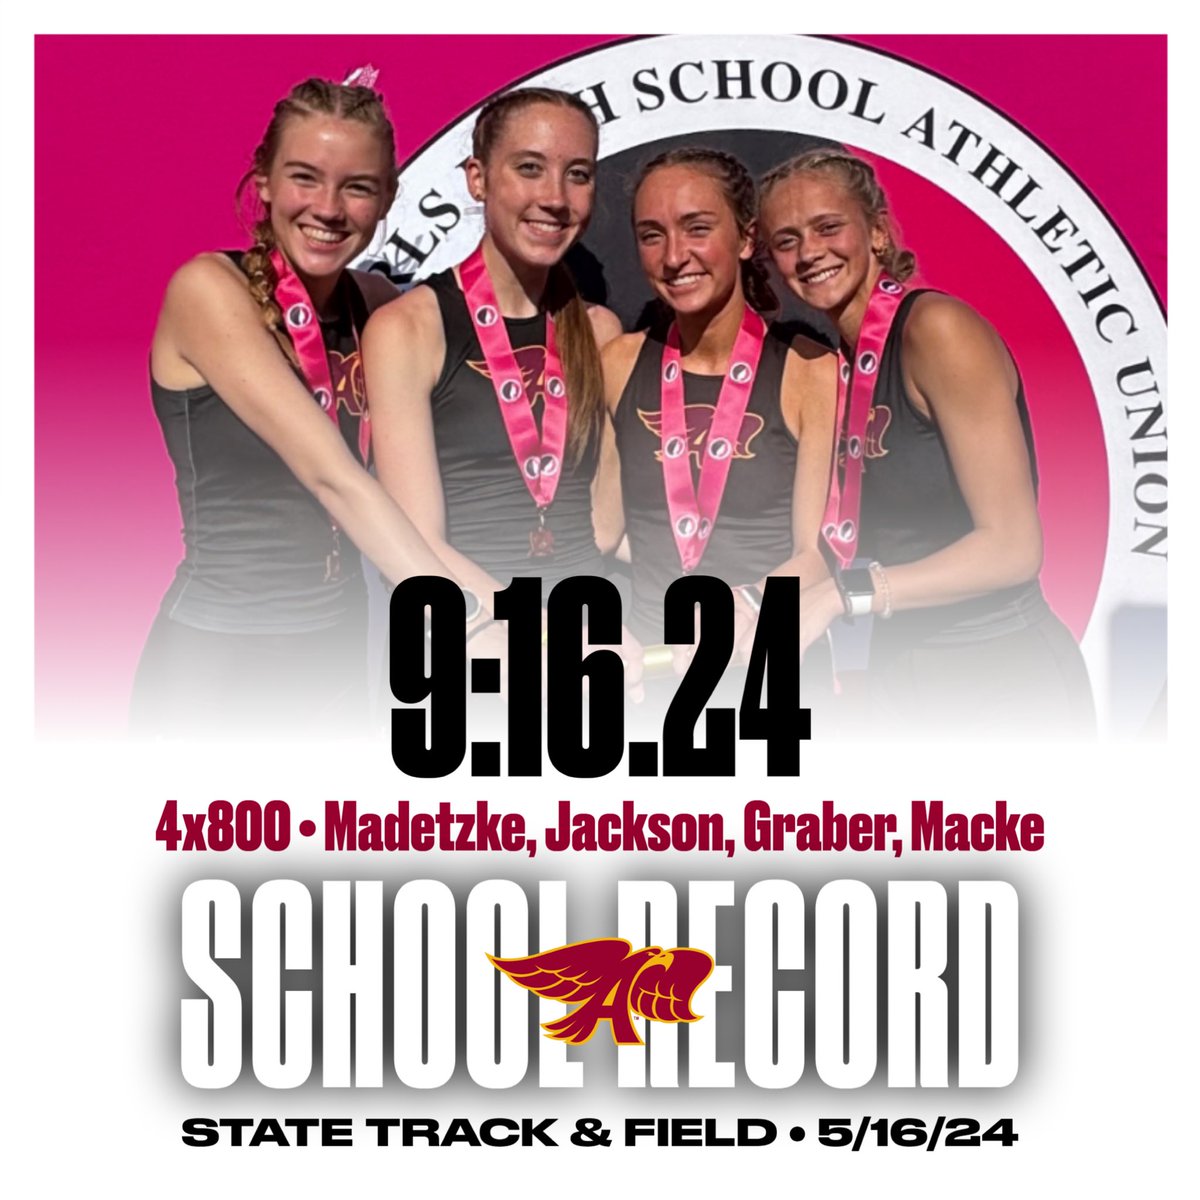 New school record and a third place finish in the 4x800!! Makenna Madetzke, Sophia Graber, Lauren Jackson, Alli Macke